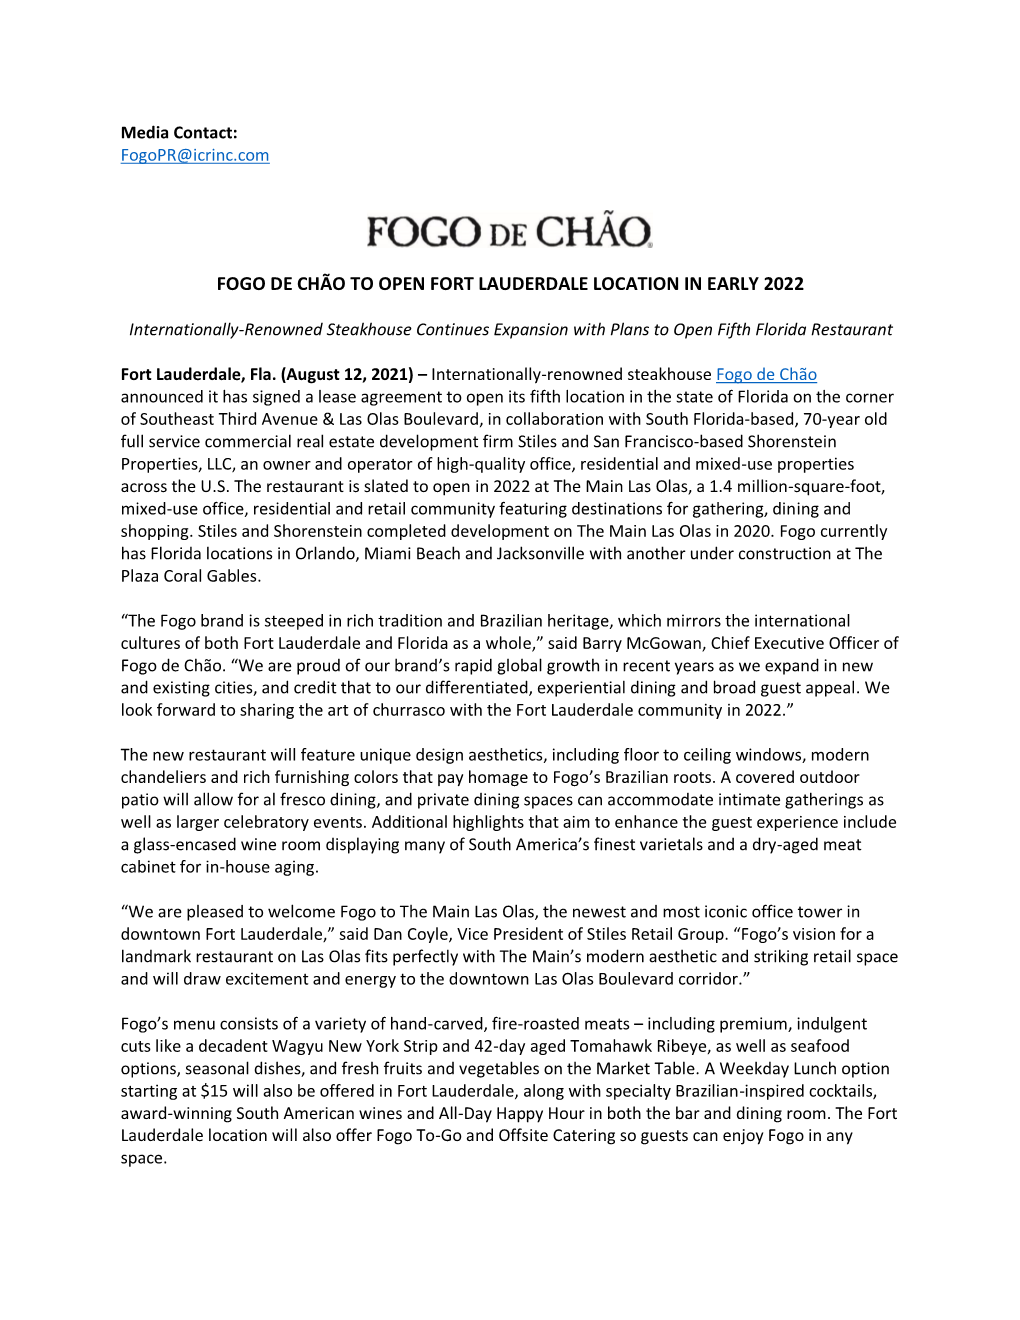 Fogo De Chão to Open Fort Lauderdale Location in Early 2022